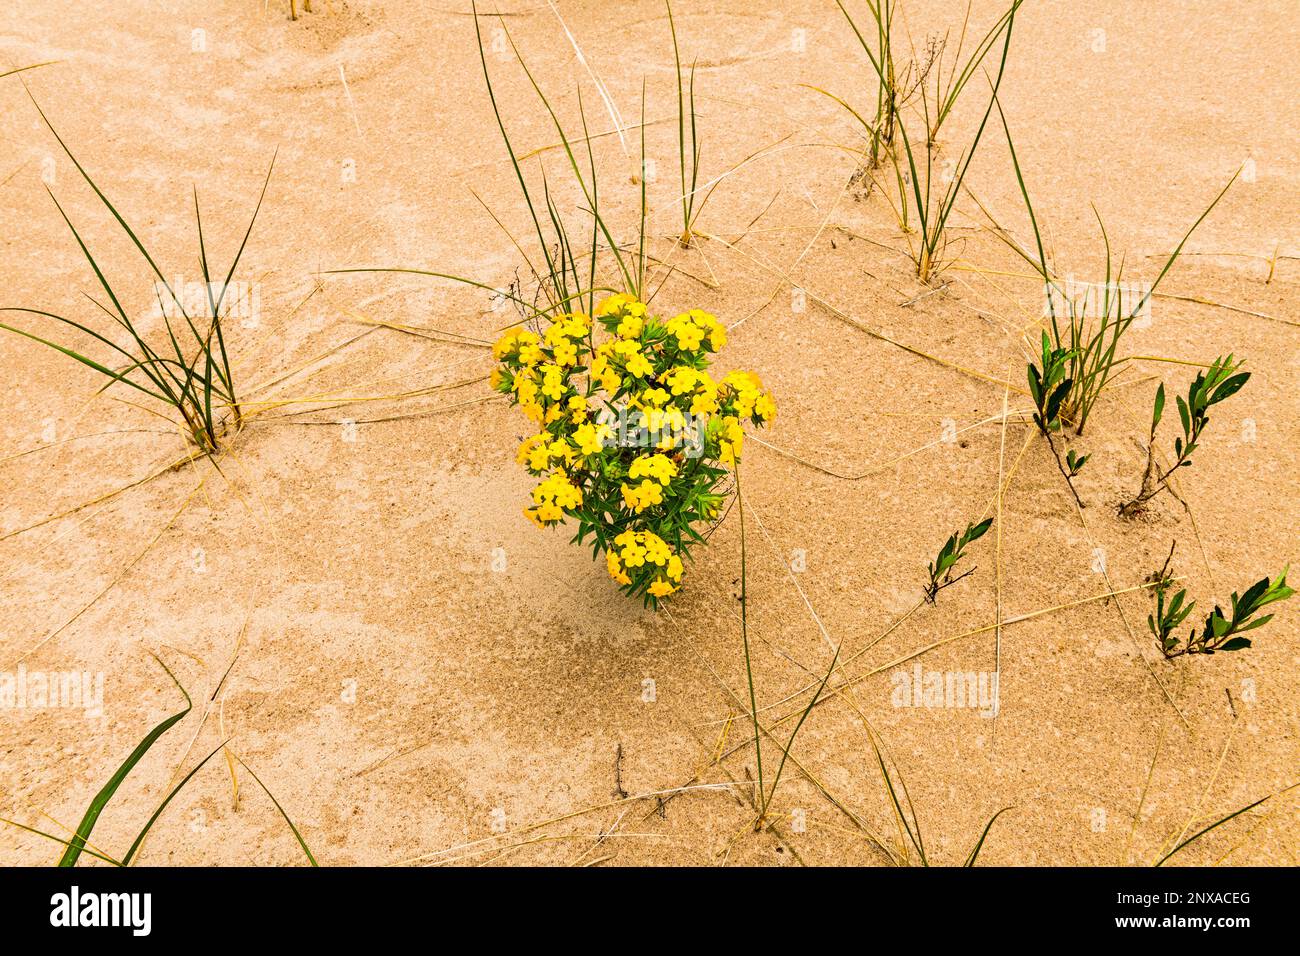 The dune flower, hoary puccoon(Lithospermum canescens) in Ludington State Park near Ludington, Michigan, USA Stock Photo